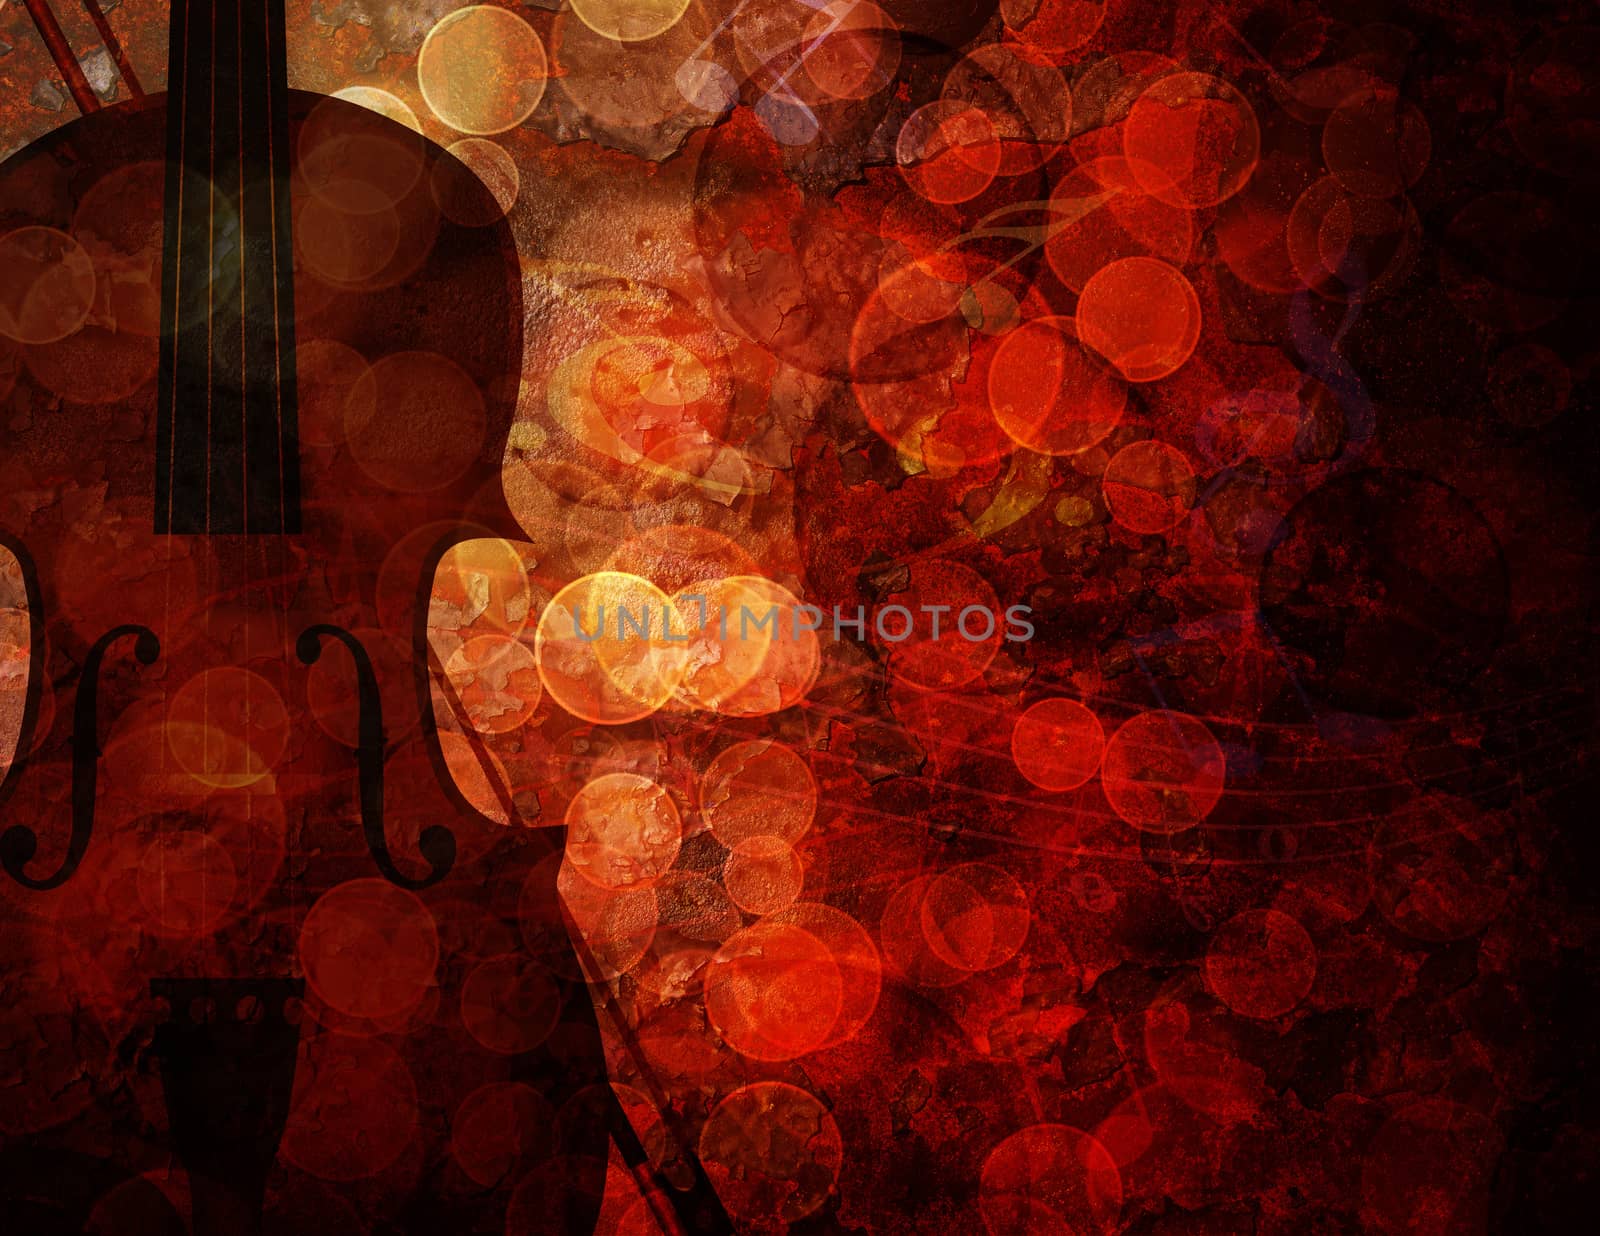 Violin with Bokeh Musical Notes and Red Grunge Texture Background Illustration